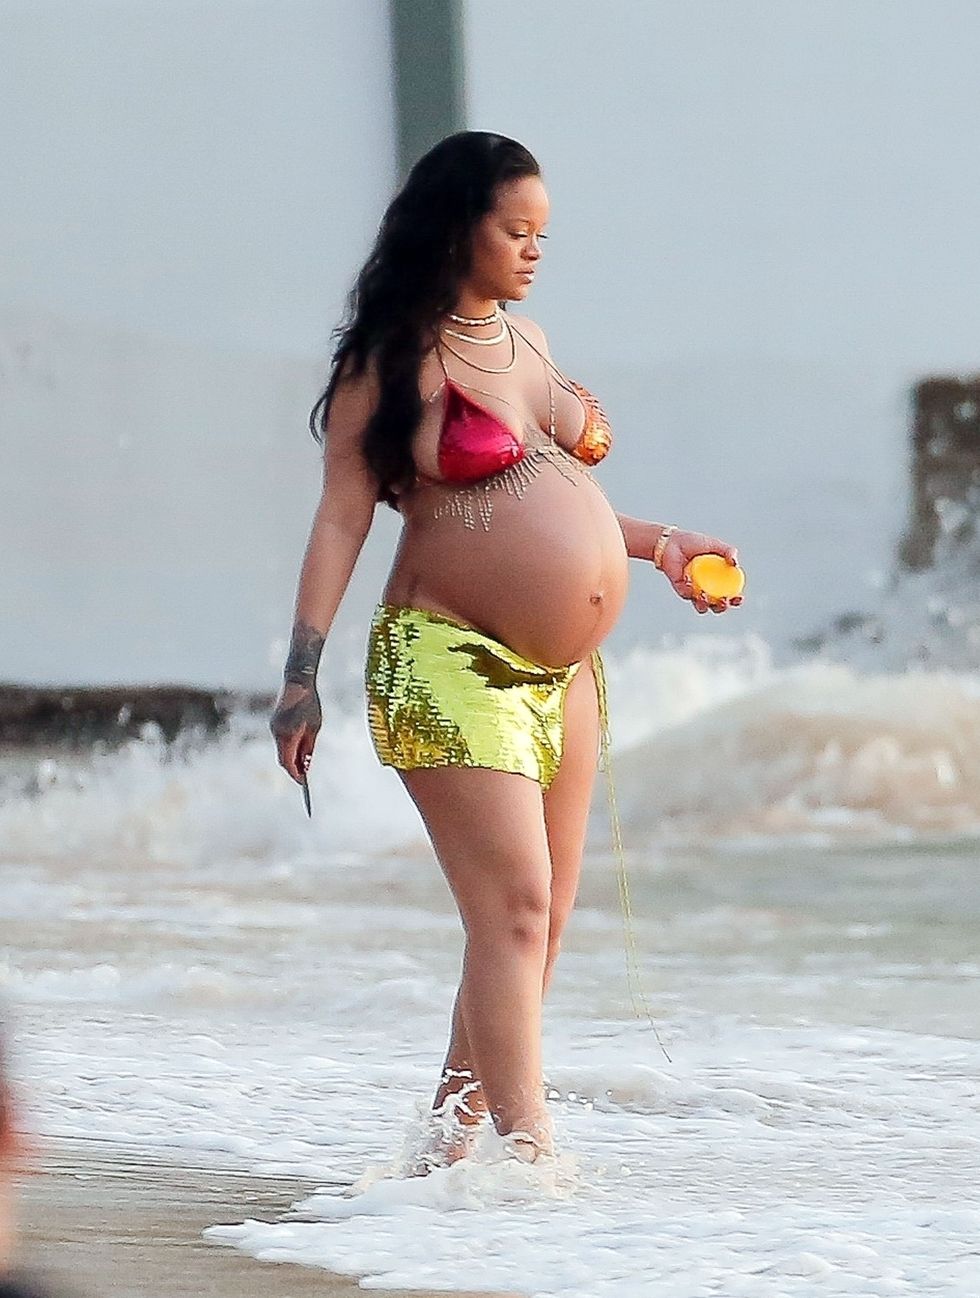 Rihanna Wearing a Sheer YSL Bra Top and Alexander Wang Shorts, Rihanna  Gives Her Pregnancy Style a Y2K Spin in a Fuzzy Tube Top